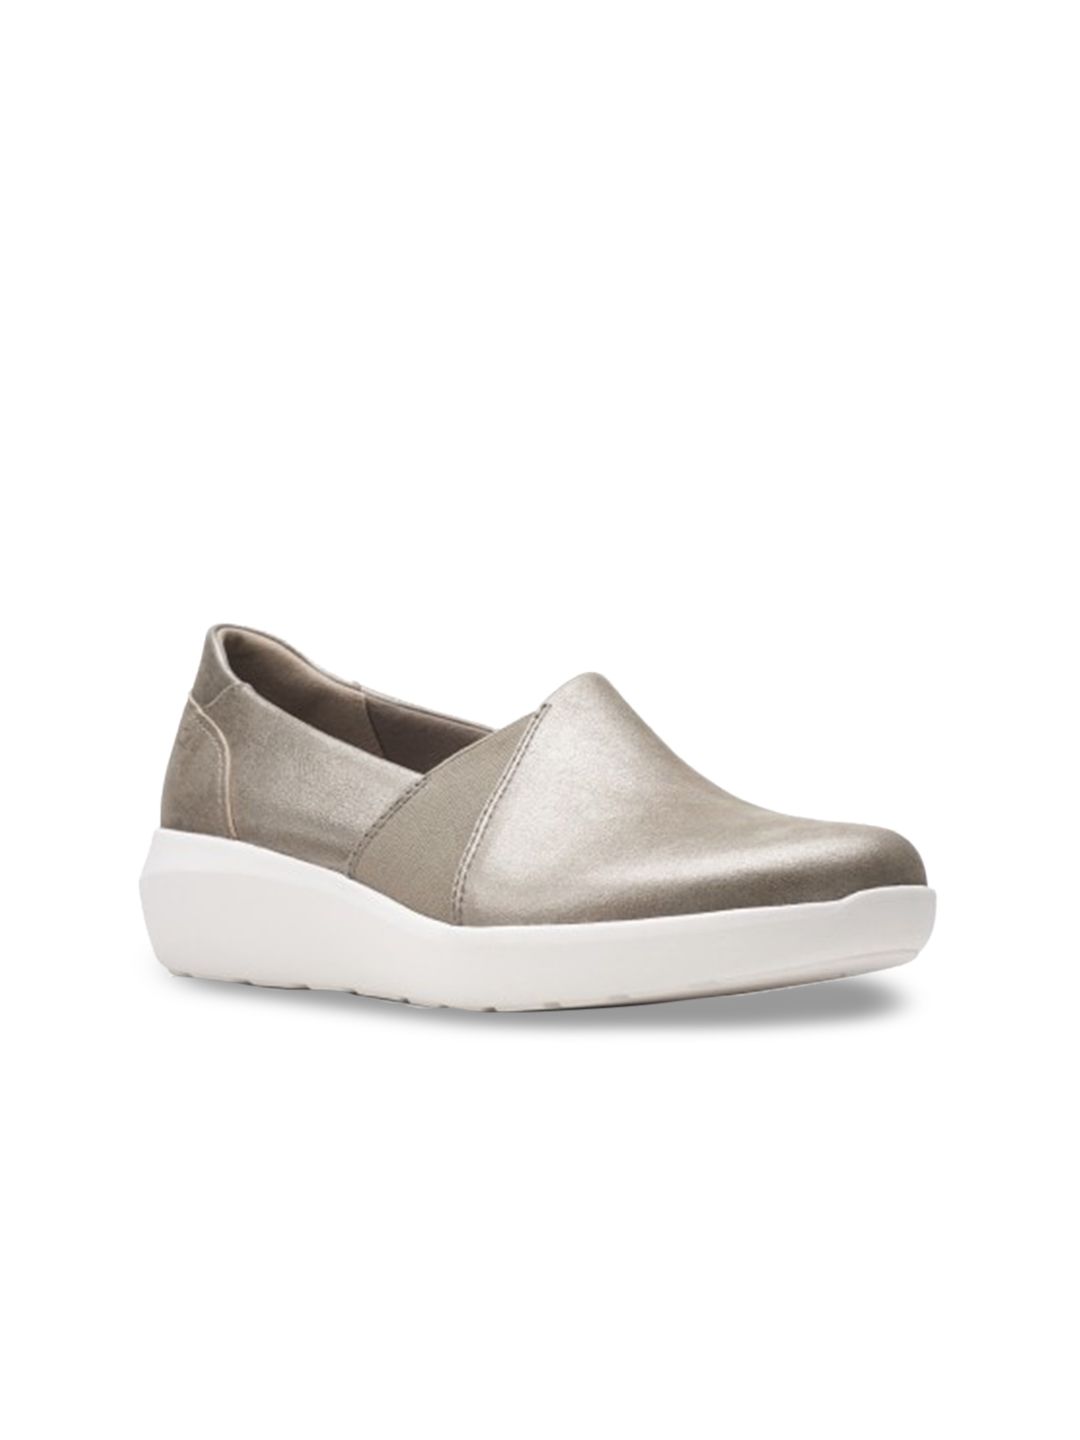 Clarks Women Gunmetal-Toned Solid Leather Slip-On Sneakers Price in India